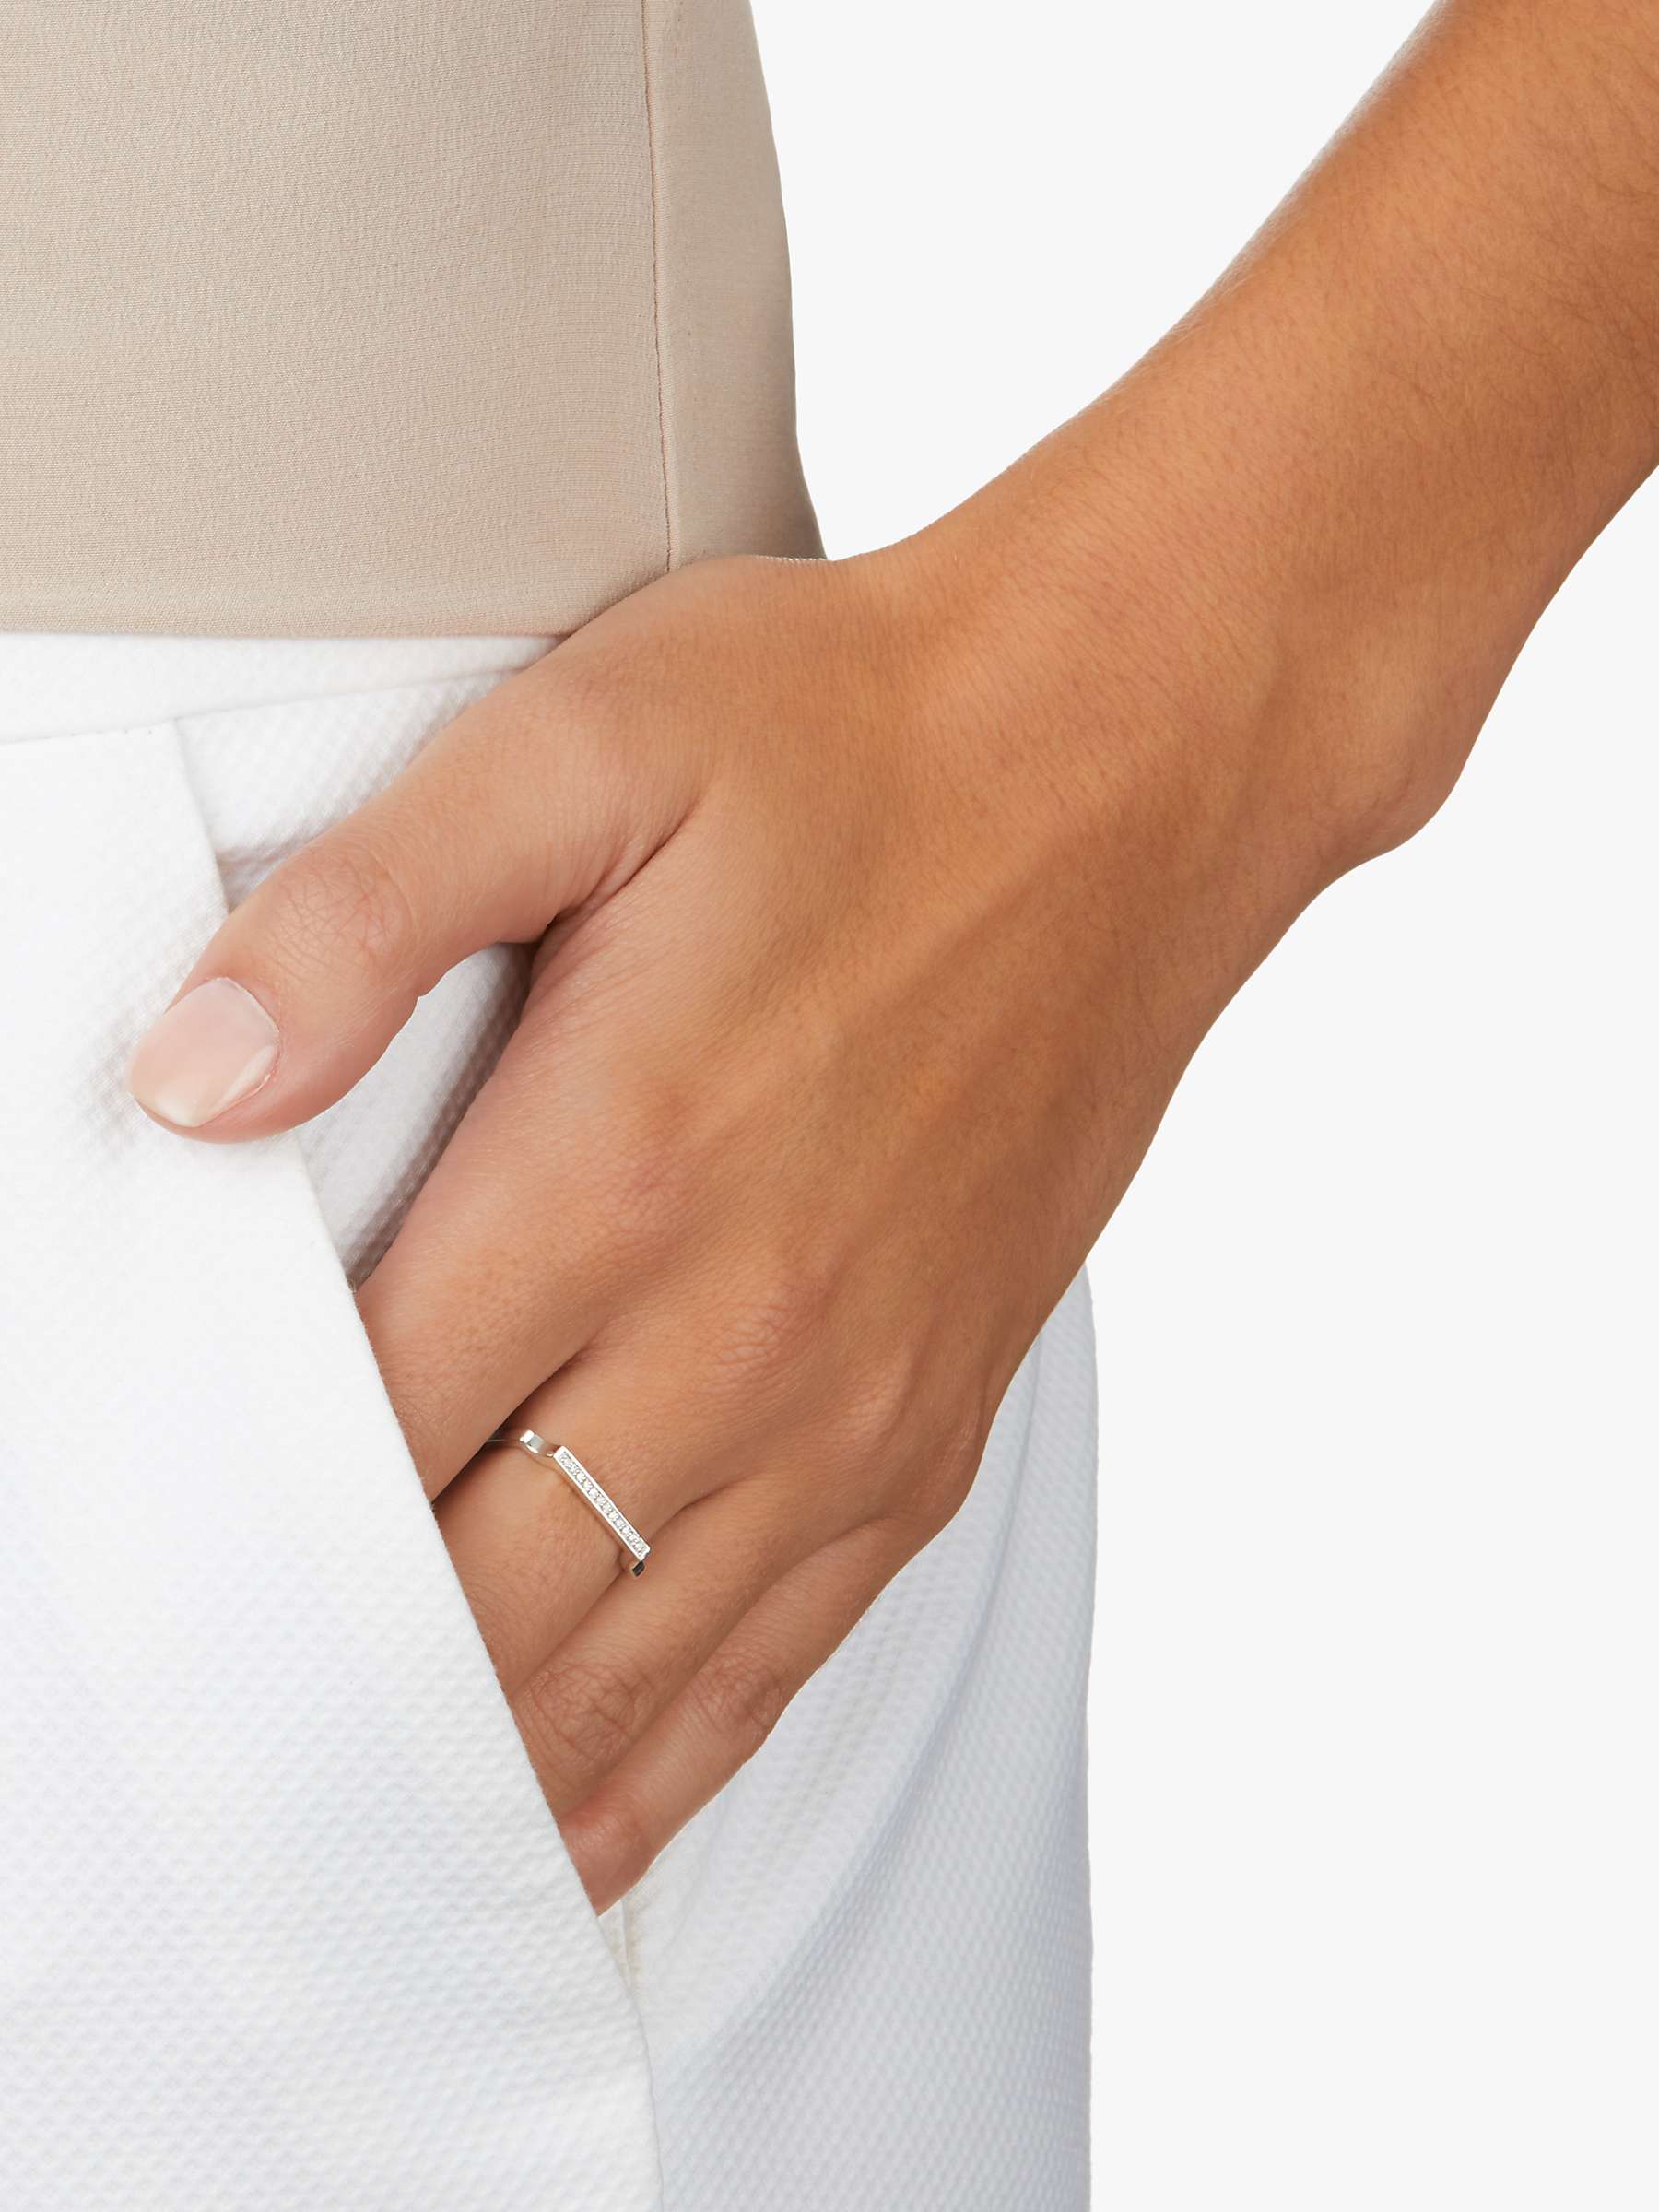 Buy Monica Vinader Signature Thin Diamond Ring, Silver Online at johnlewis.com